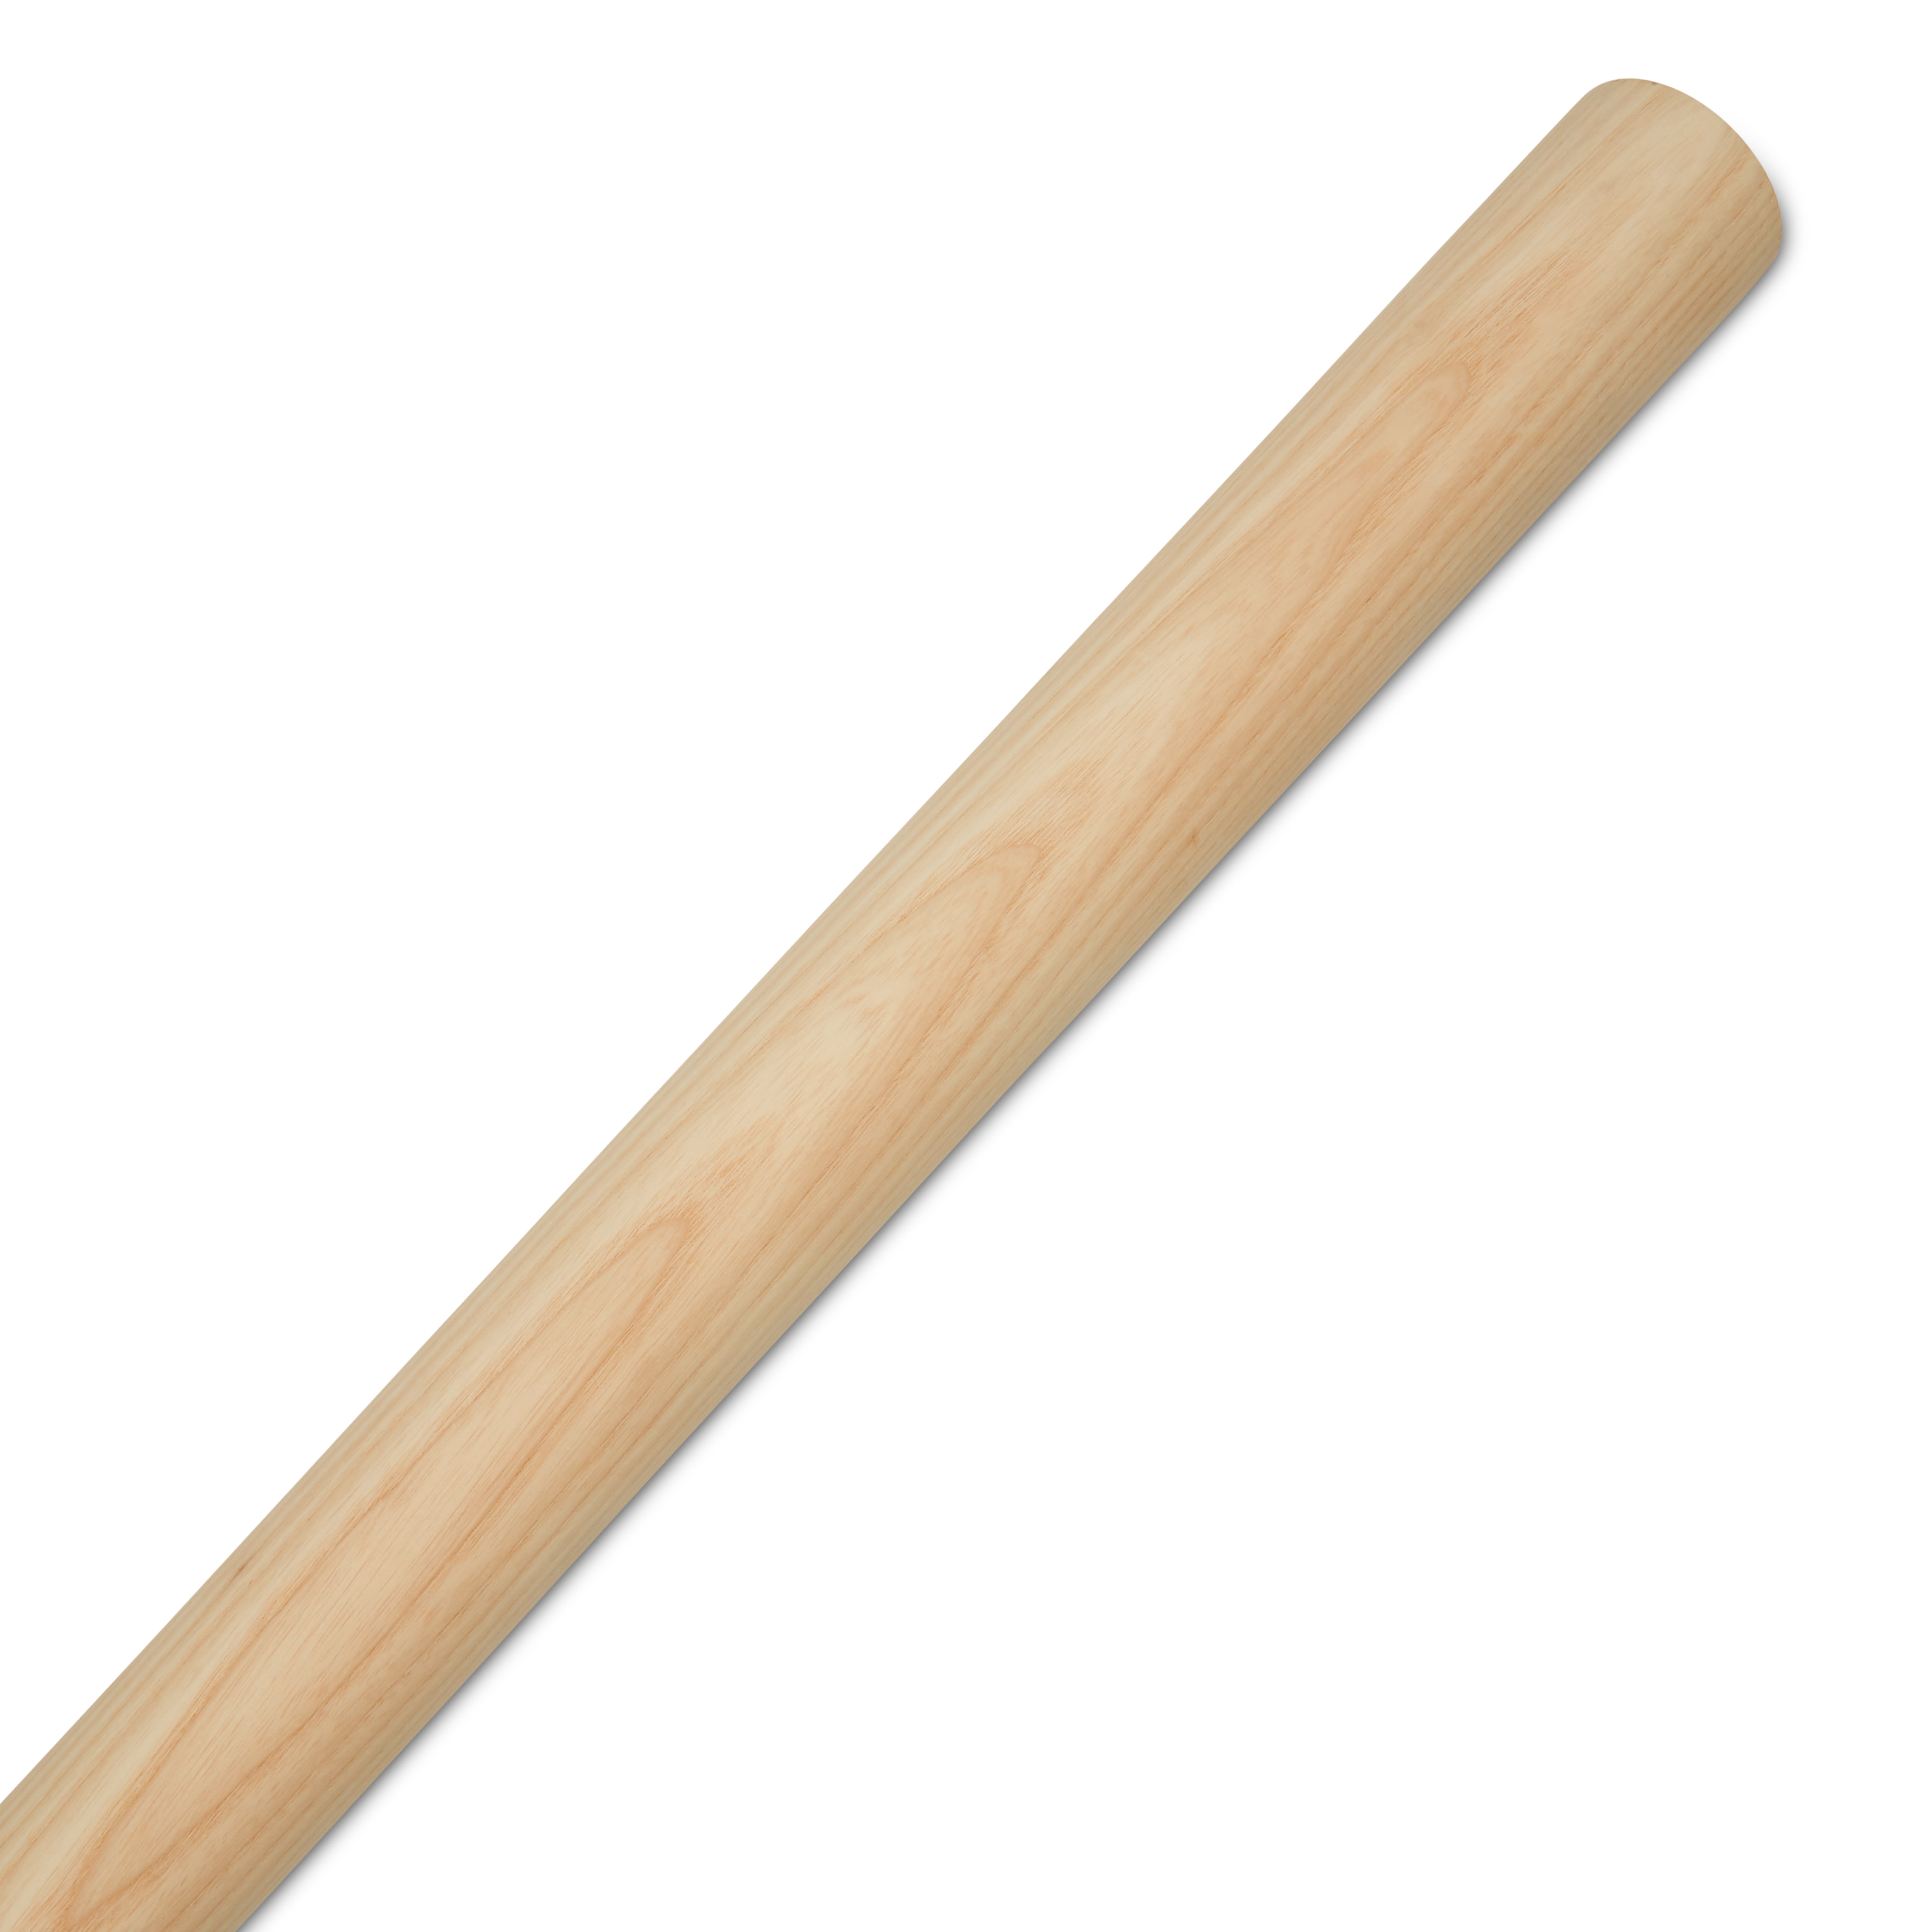 Dowel Rods Wood Sticks Wooden Dowel Rods - 1/2 x 12 Inch Unfinished  Hardwood Sticks - for Crafts and DIYers - 100 Pieces by Woodpeckers 